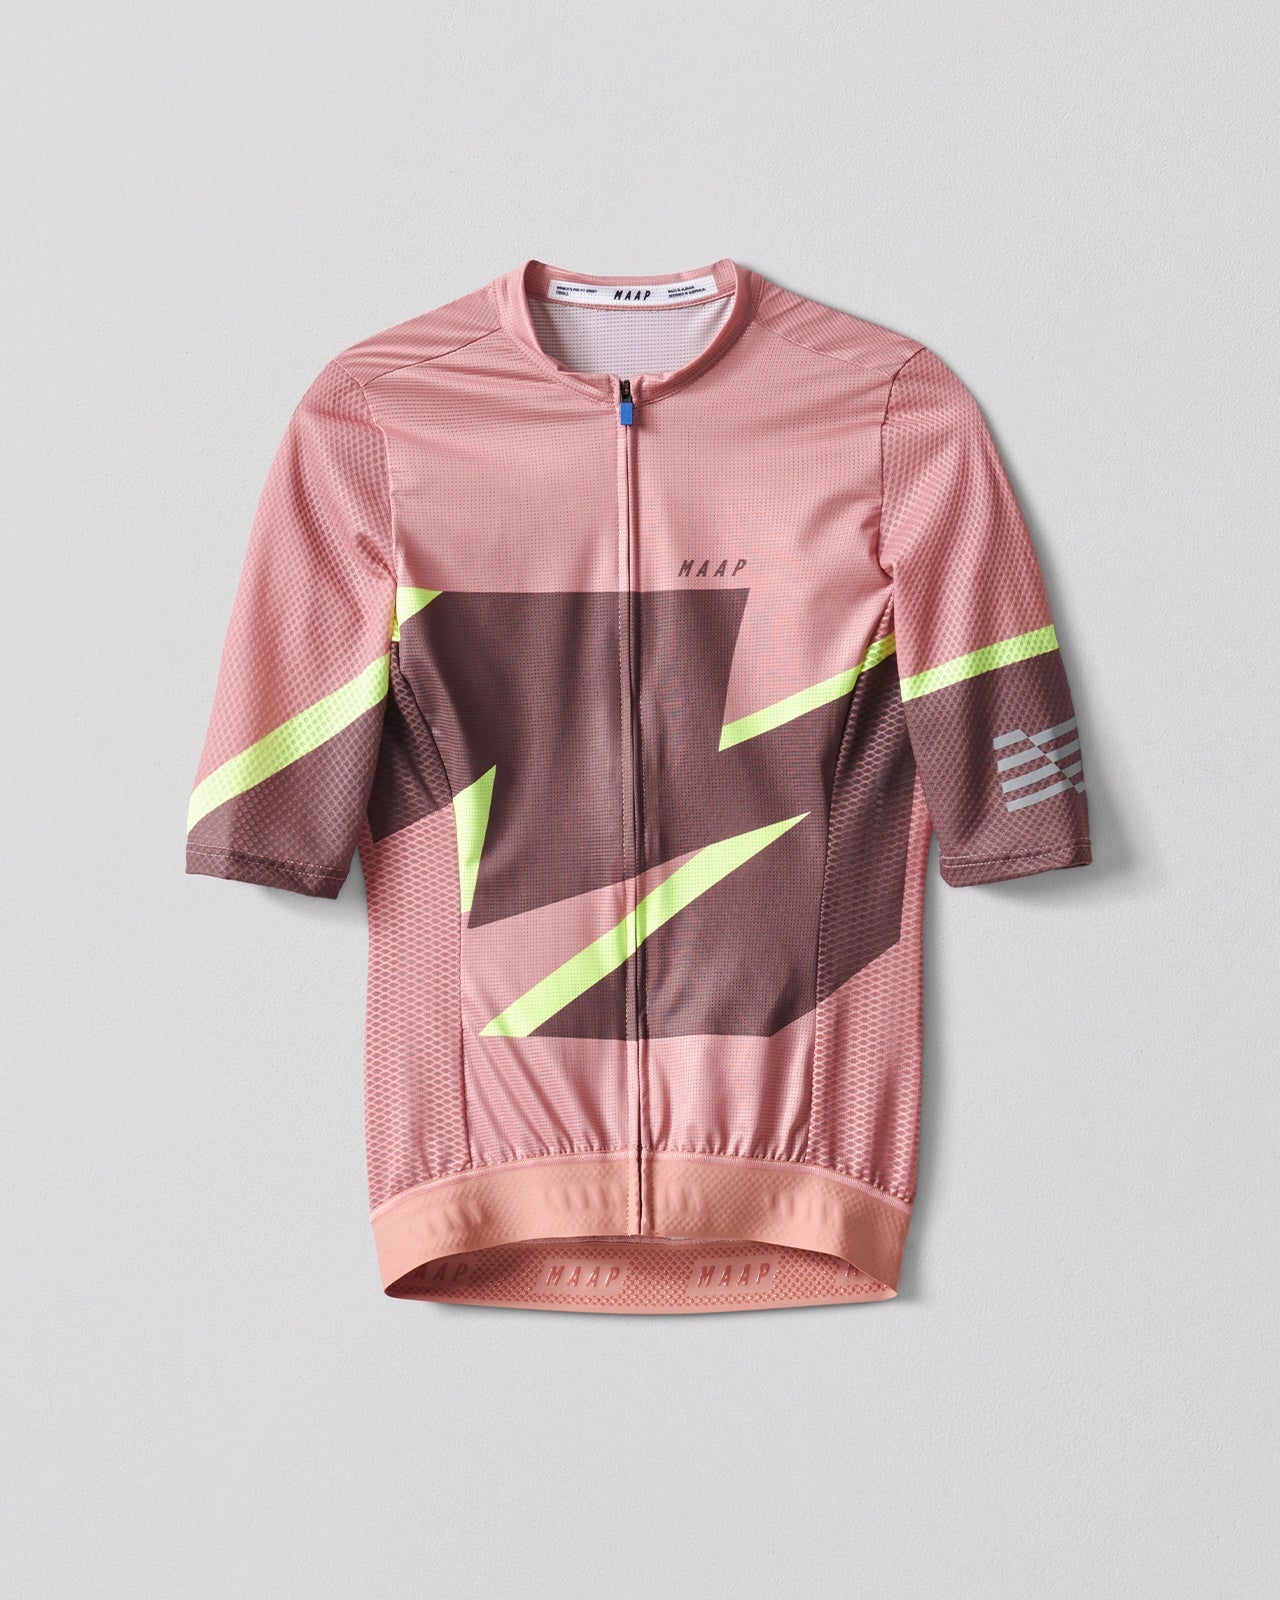 MAAP Evolve 3D Pro Air Jersey Musk レディース サイクル ジャージ | CYCLISM